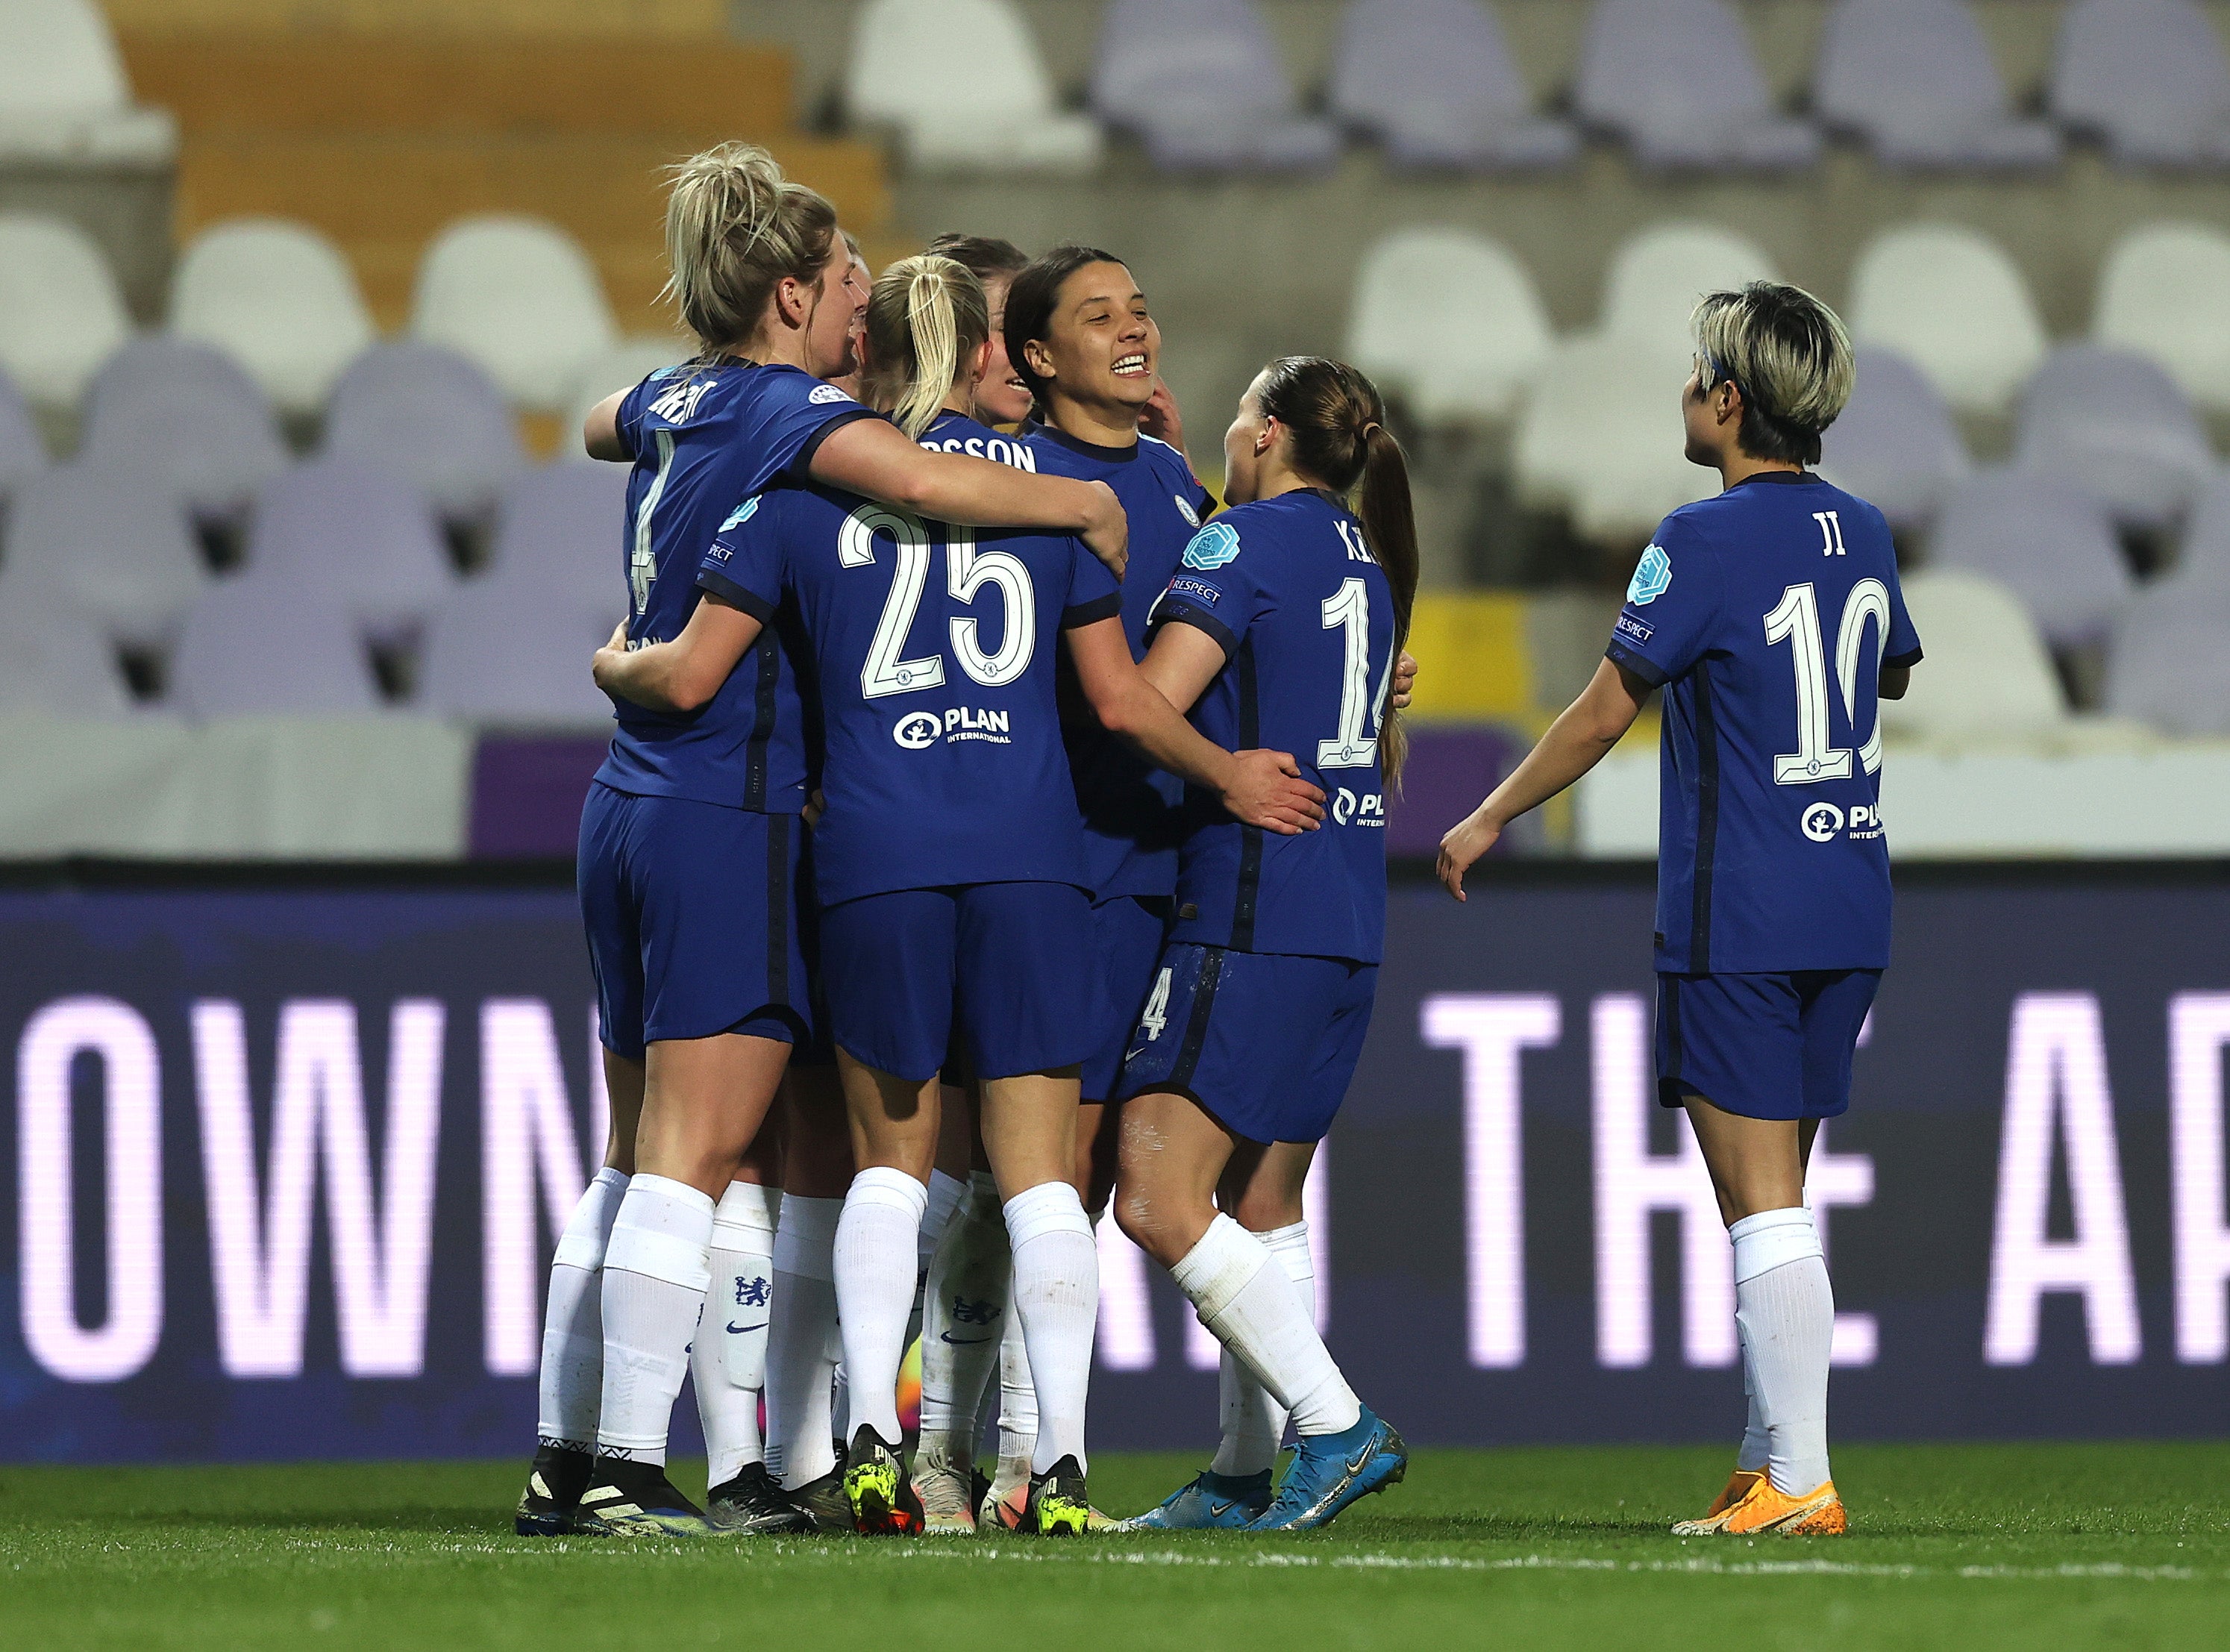 Chelsea are among the teams battling for the Women’s Champions League